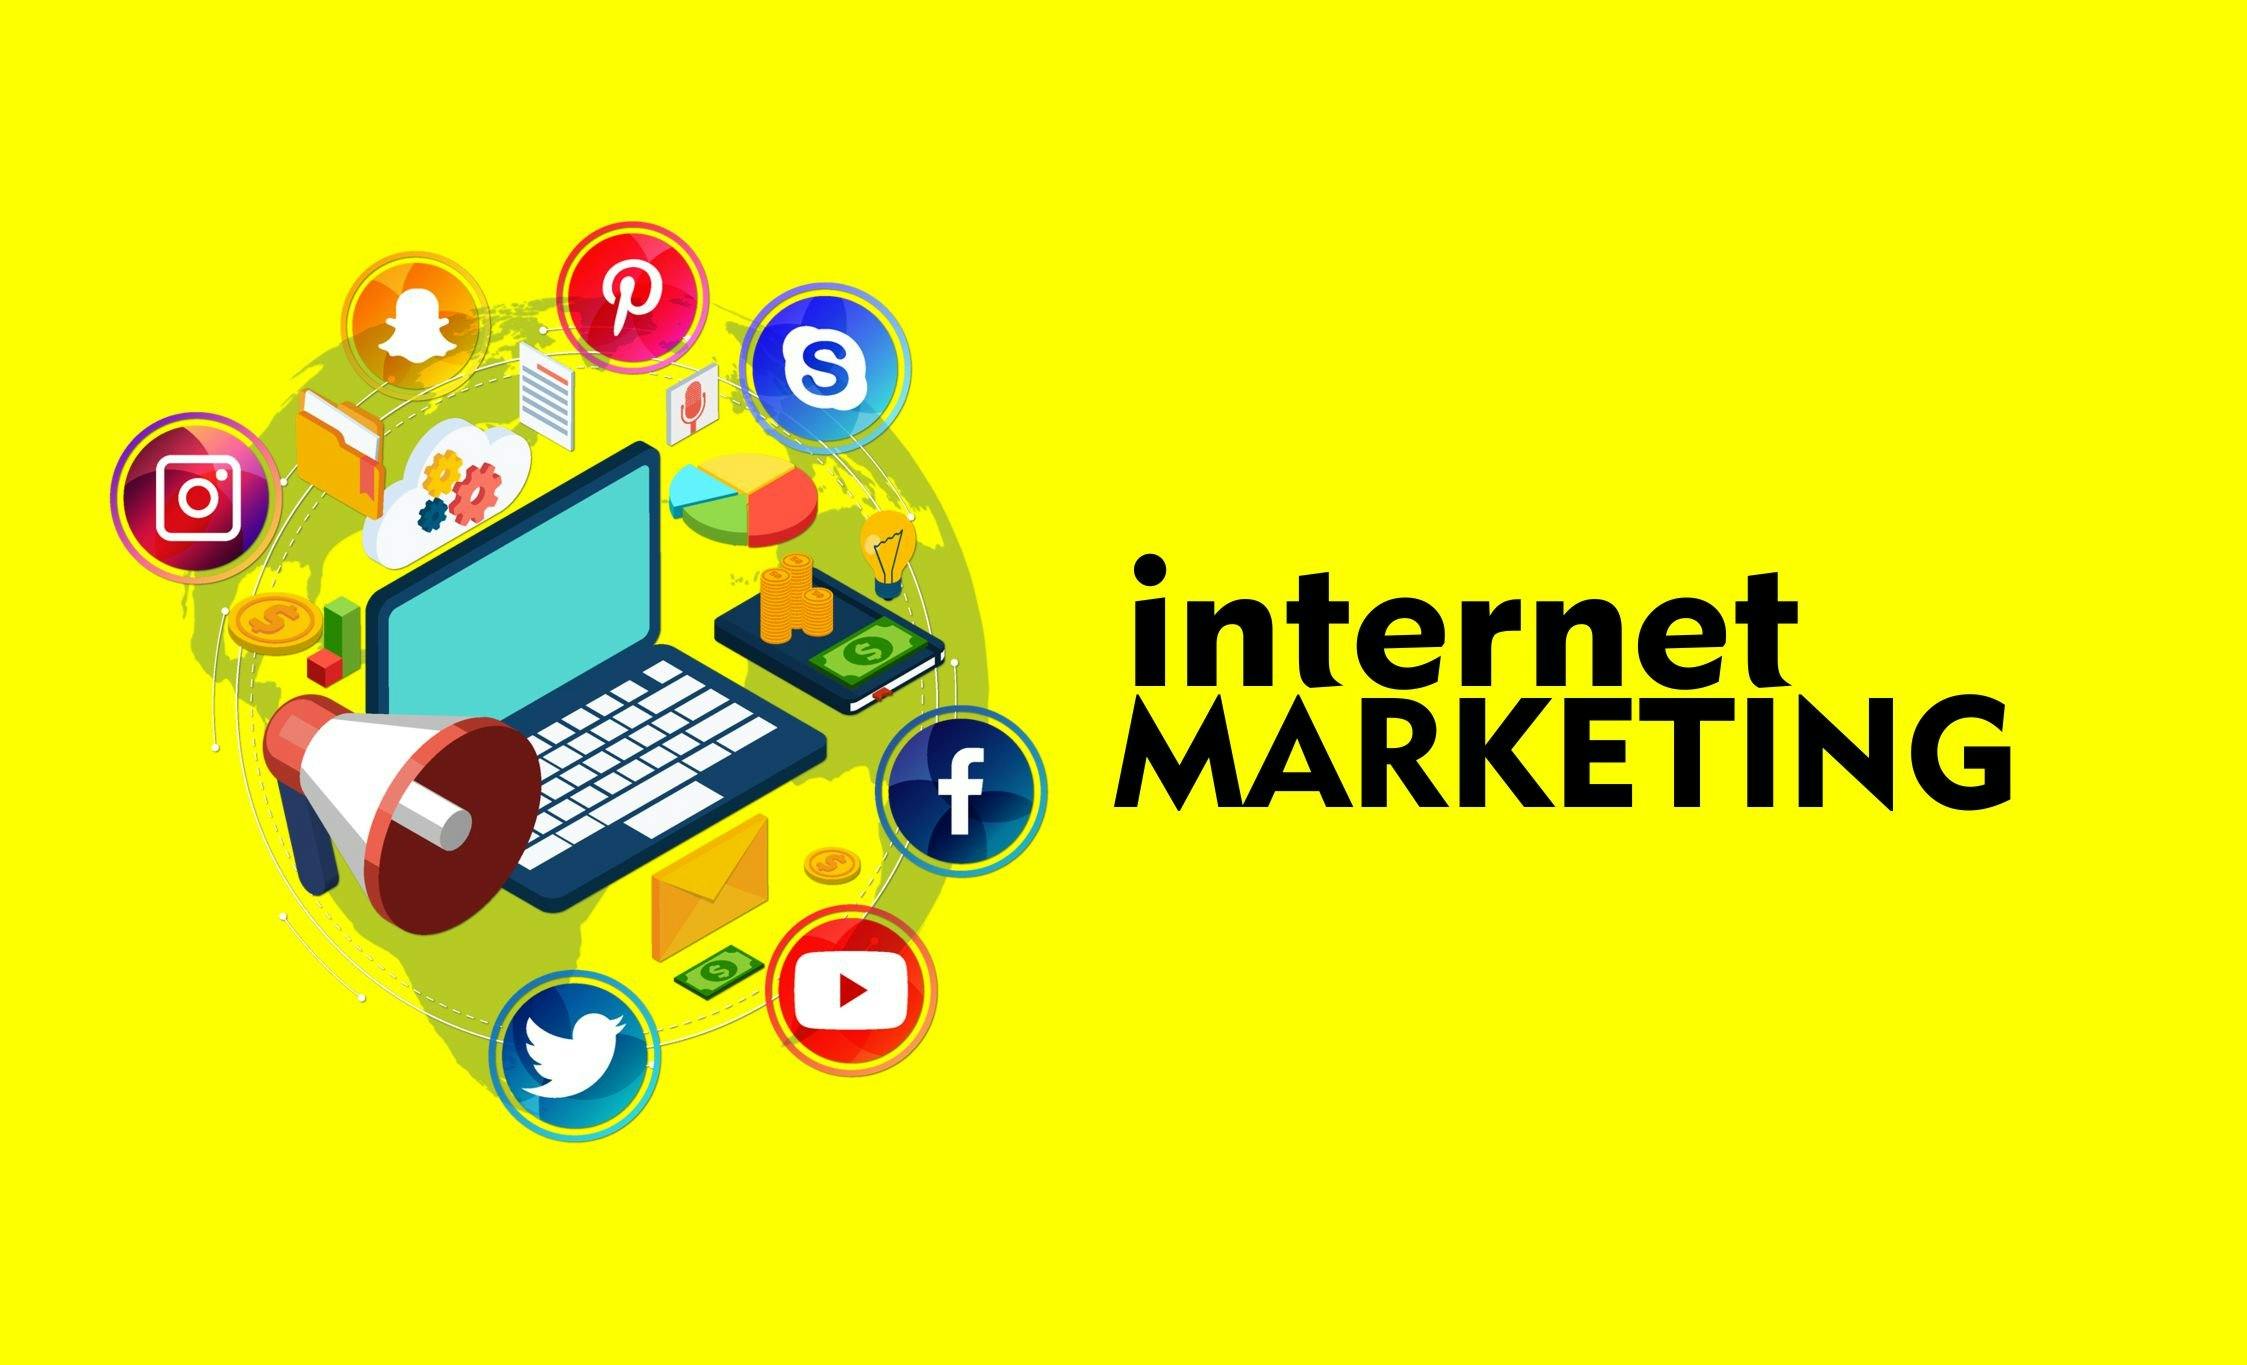 Step by step to internet marketing success